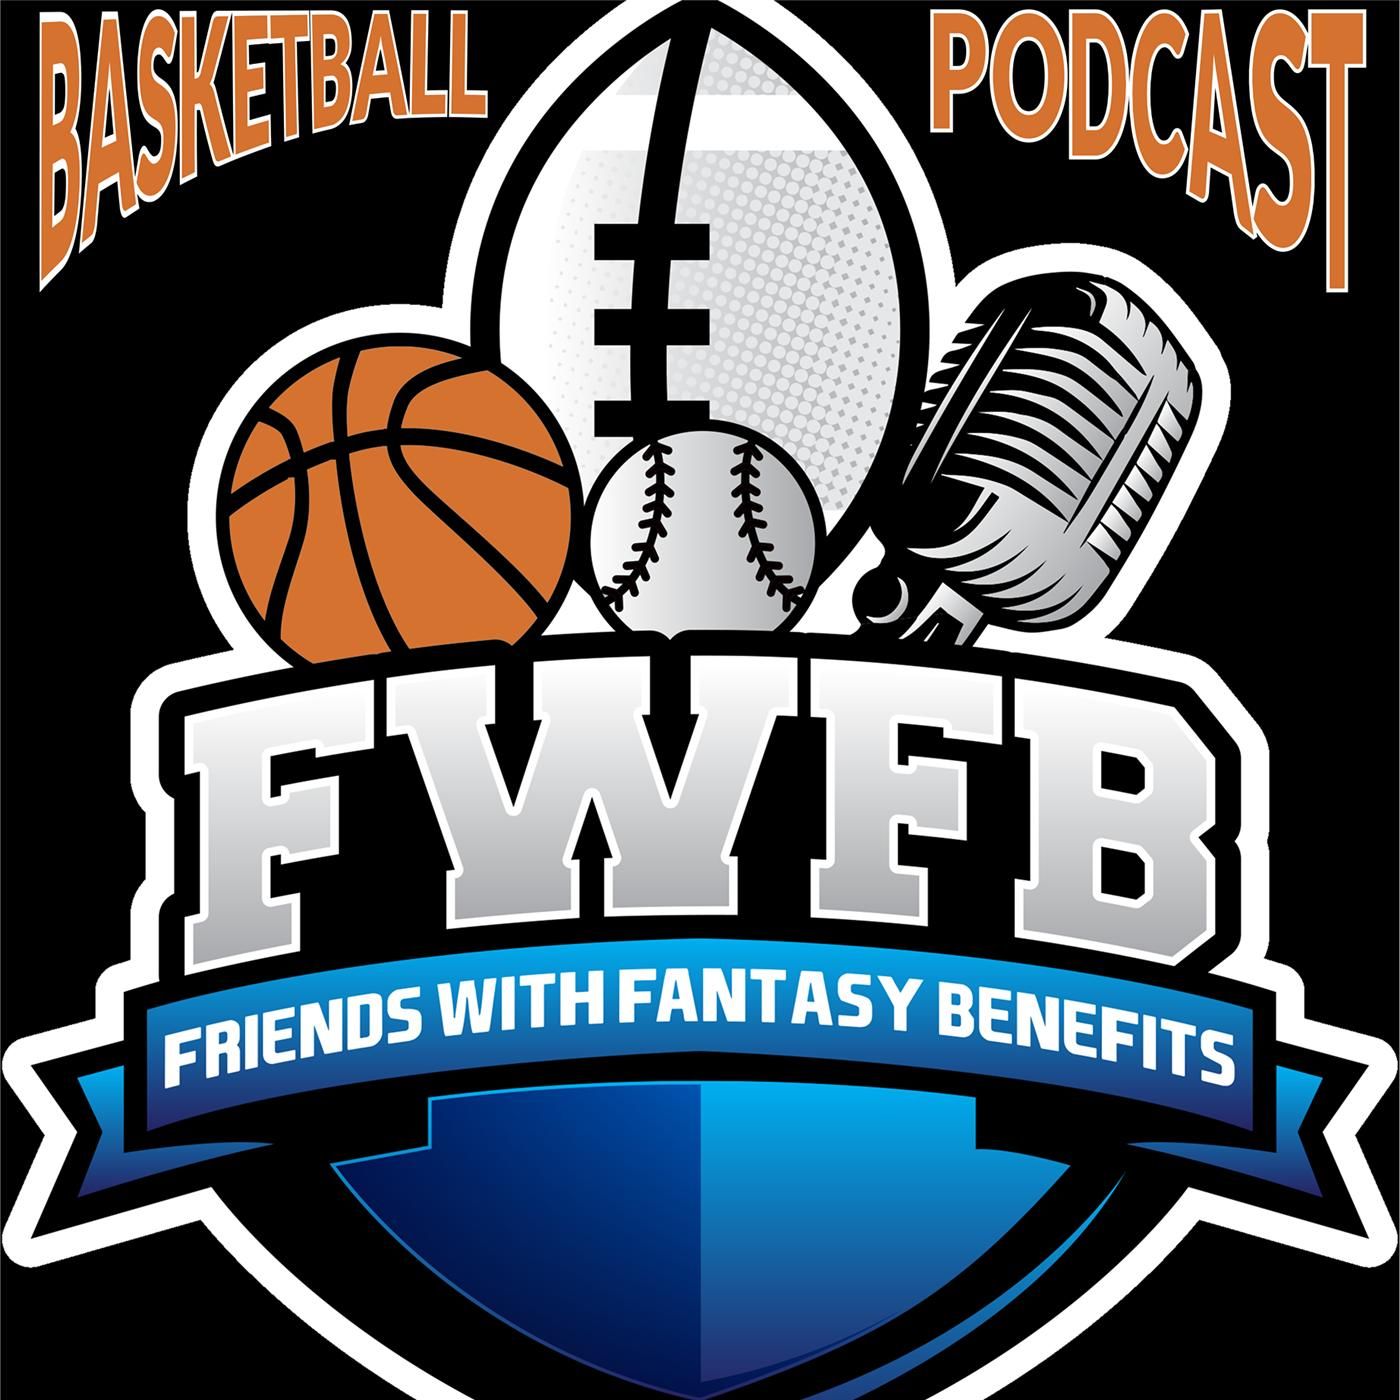 Friends with Fantasy Benefits | Basketball